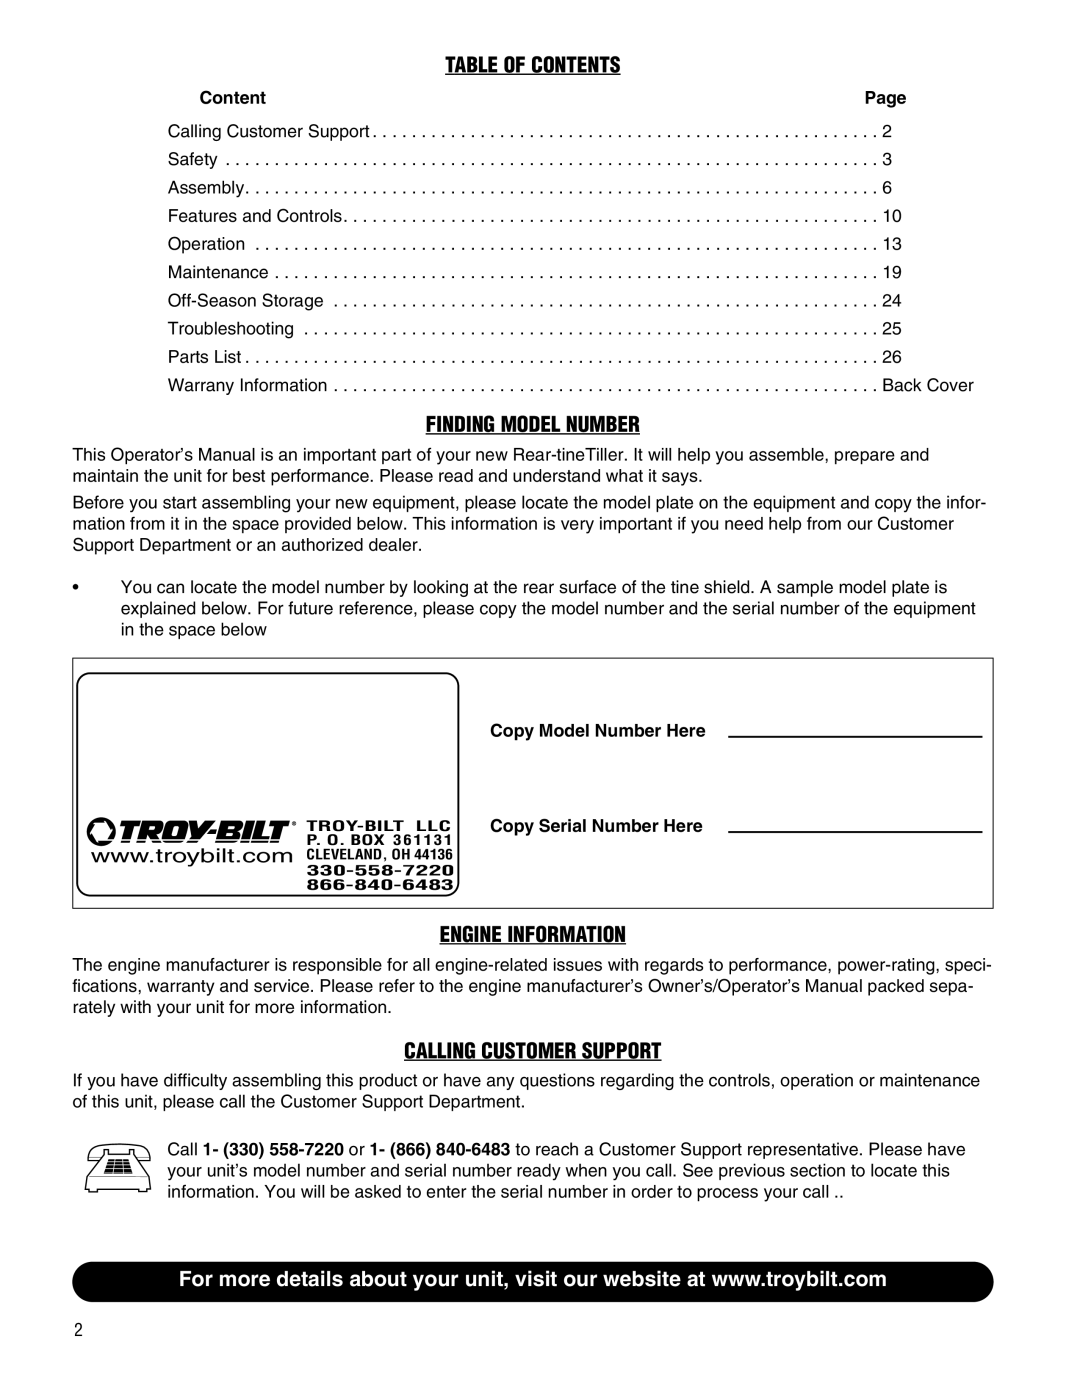 Troy-Bilt 645A-Bronco manual Table Of Contents, Finding Model Number, Engine Information, Calling Customer Support 